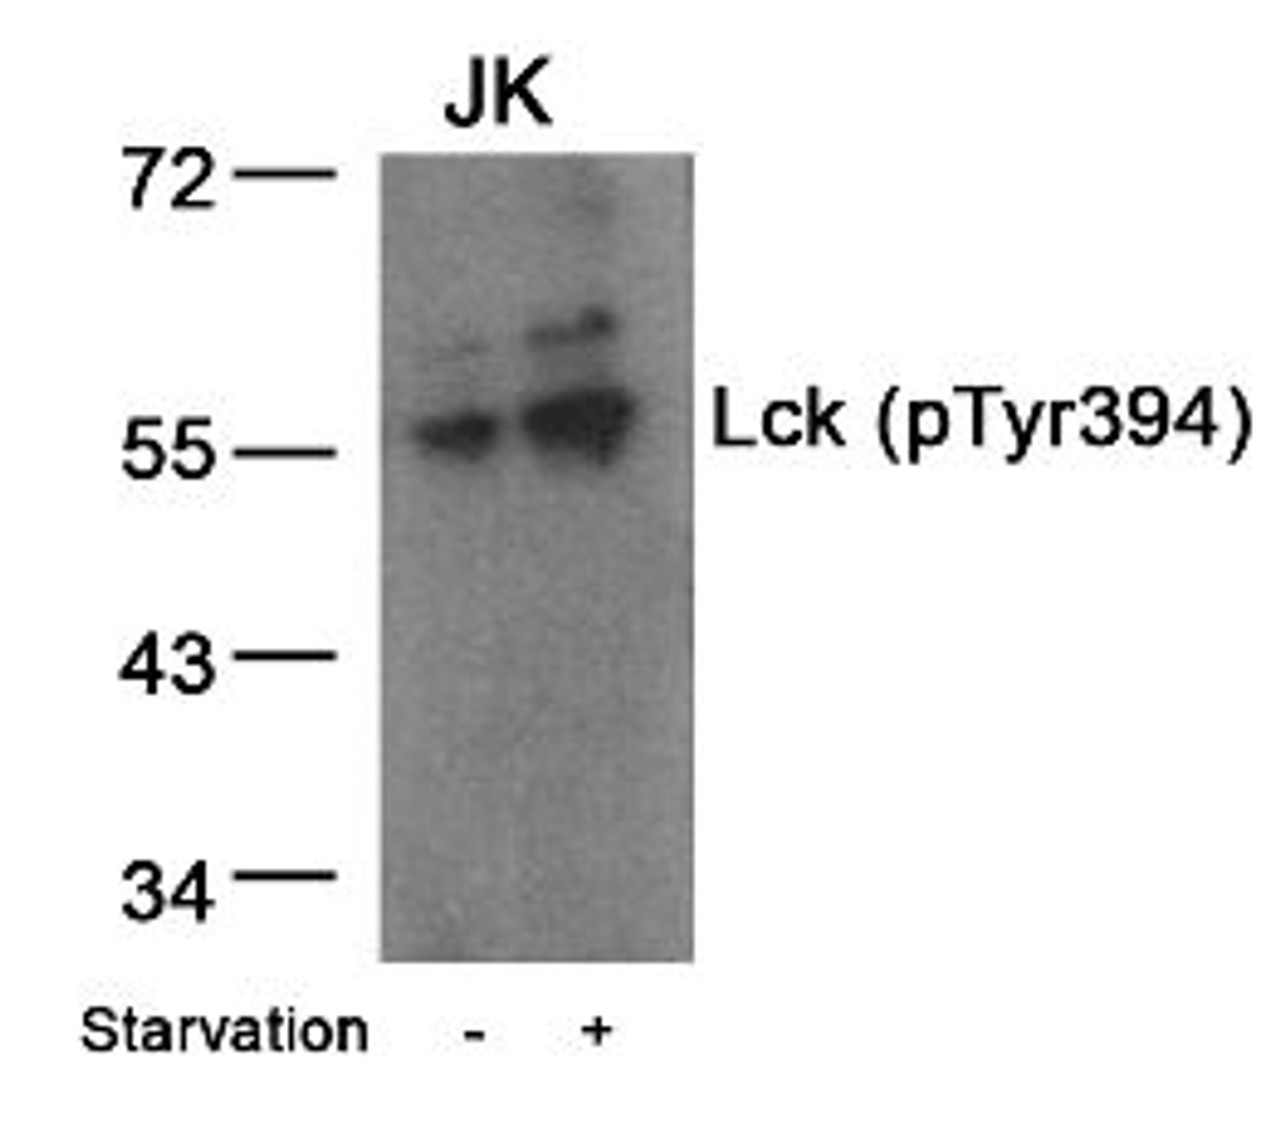 Western blot analysis of lysed extracts from JK cells untreated or treated with starvation using Lck (Phospho-Tyr394) .